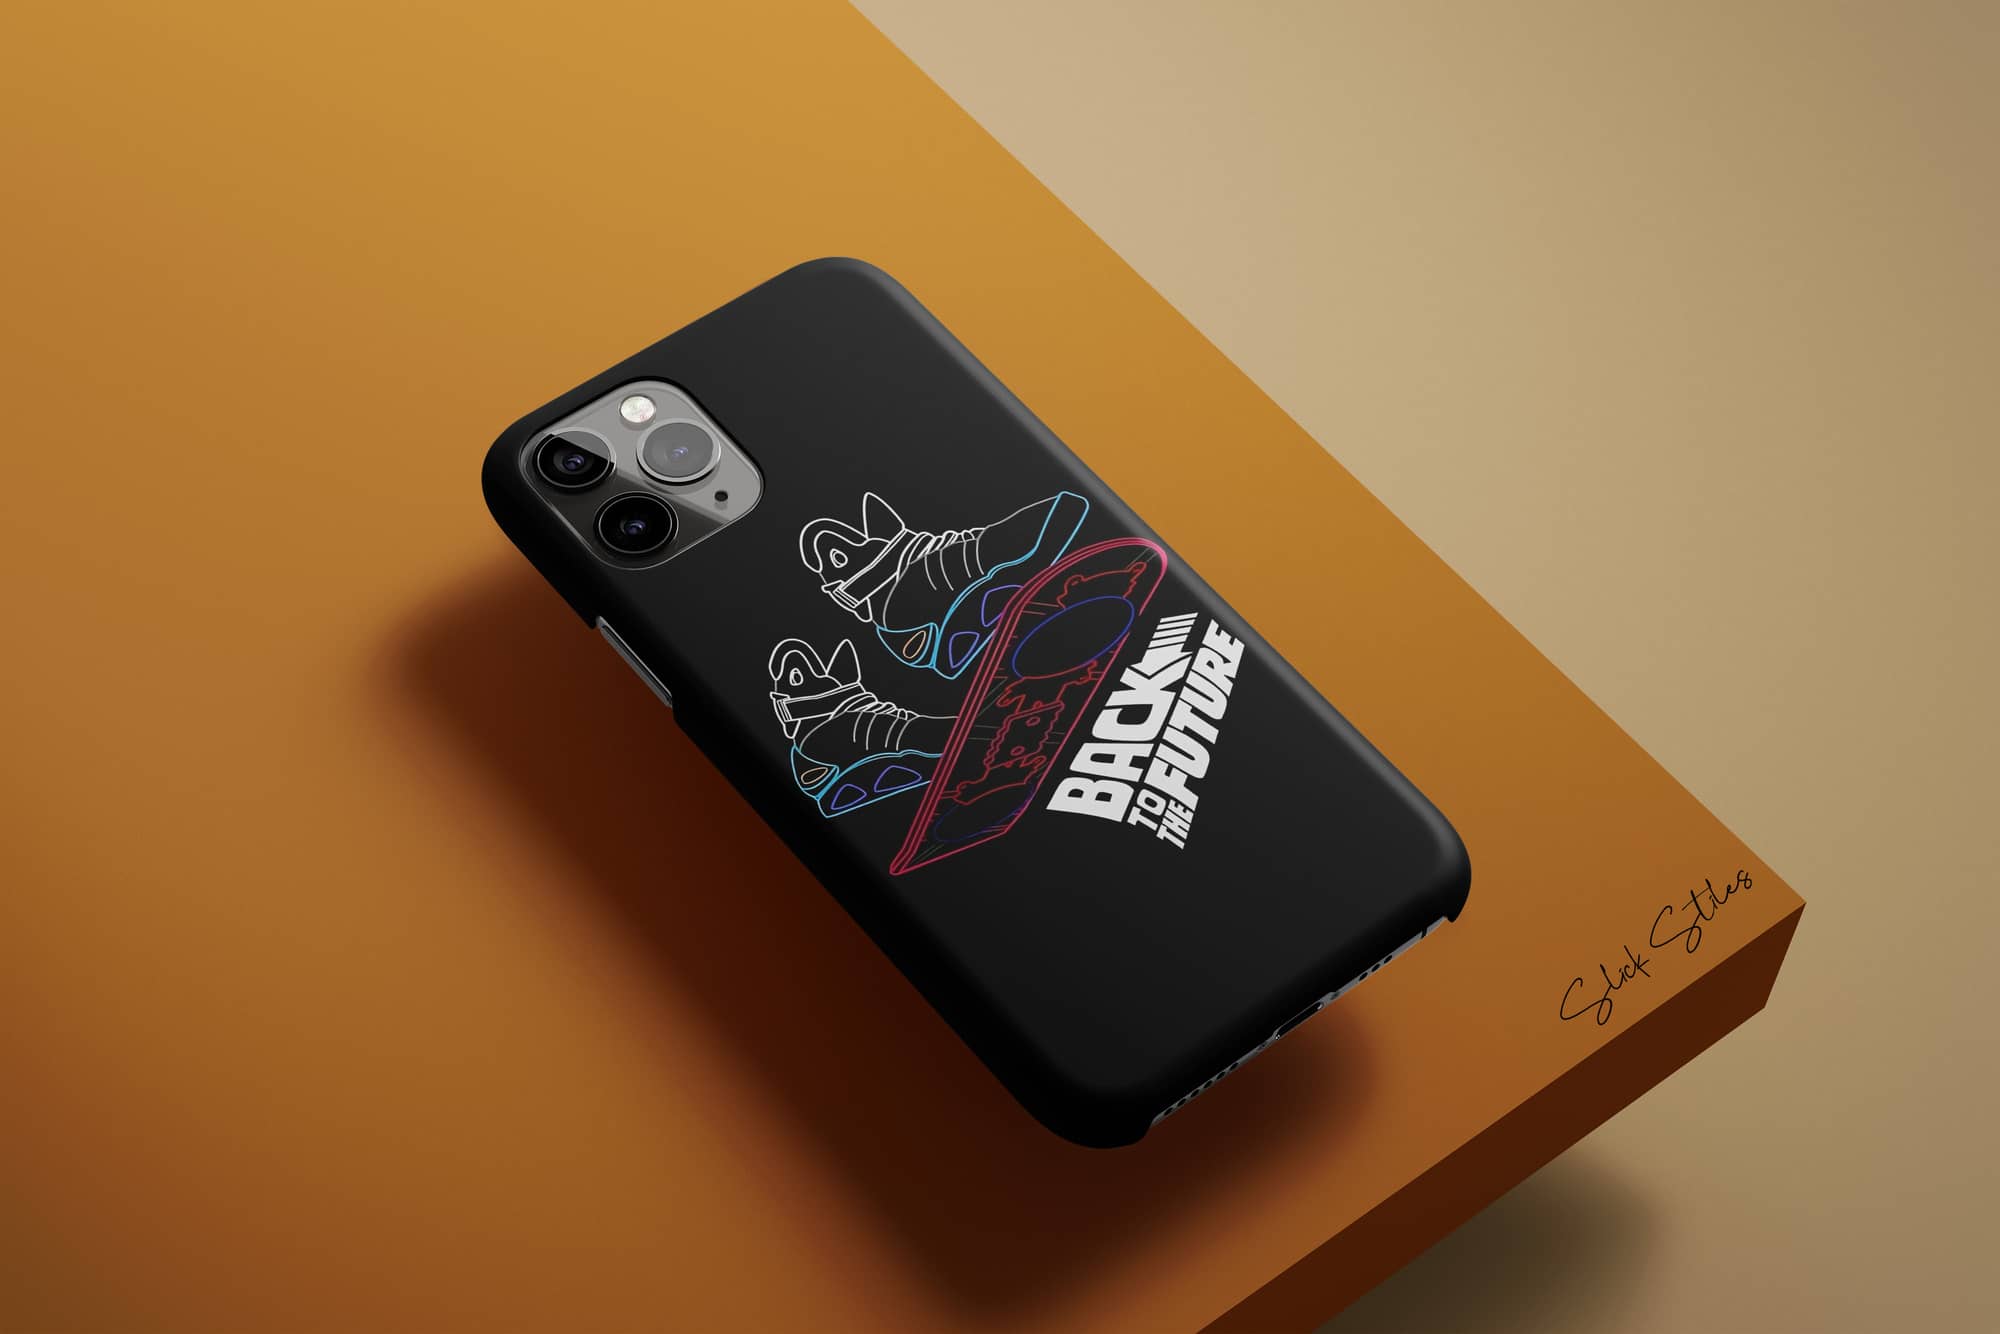 Back to the Future Phone Case